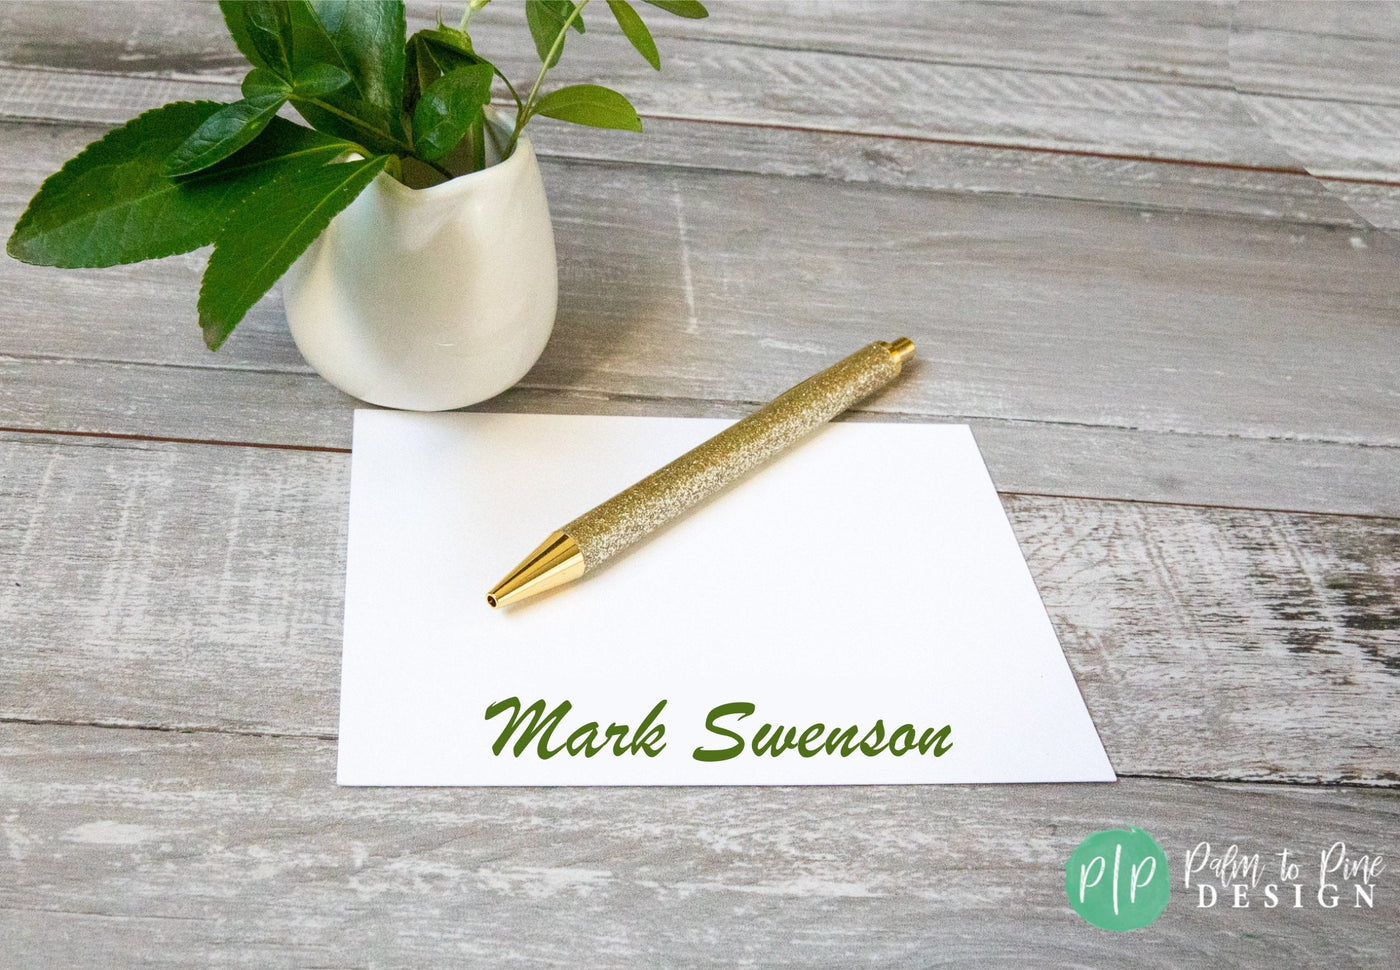 Personalized Stationary Notecards, Stationery for Men, Unique gift for him, Custom Stationary Set, Personalized Notes, Stationery with name